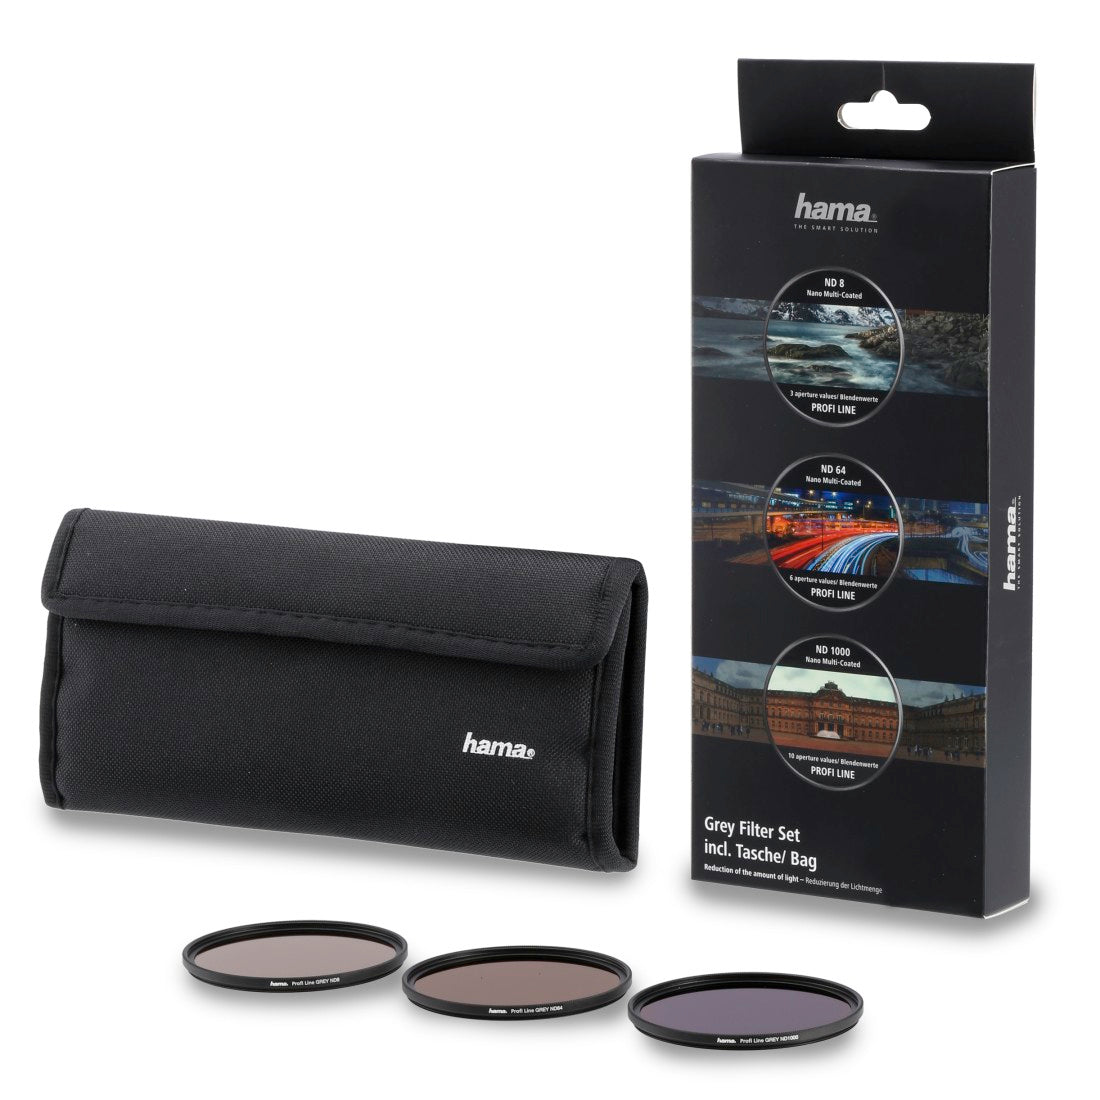 ND8, ND64, ND1000 Grey Filter Kit, 82 mm, with Filter Bag